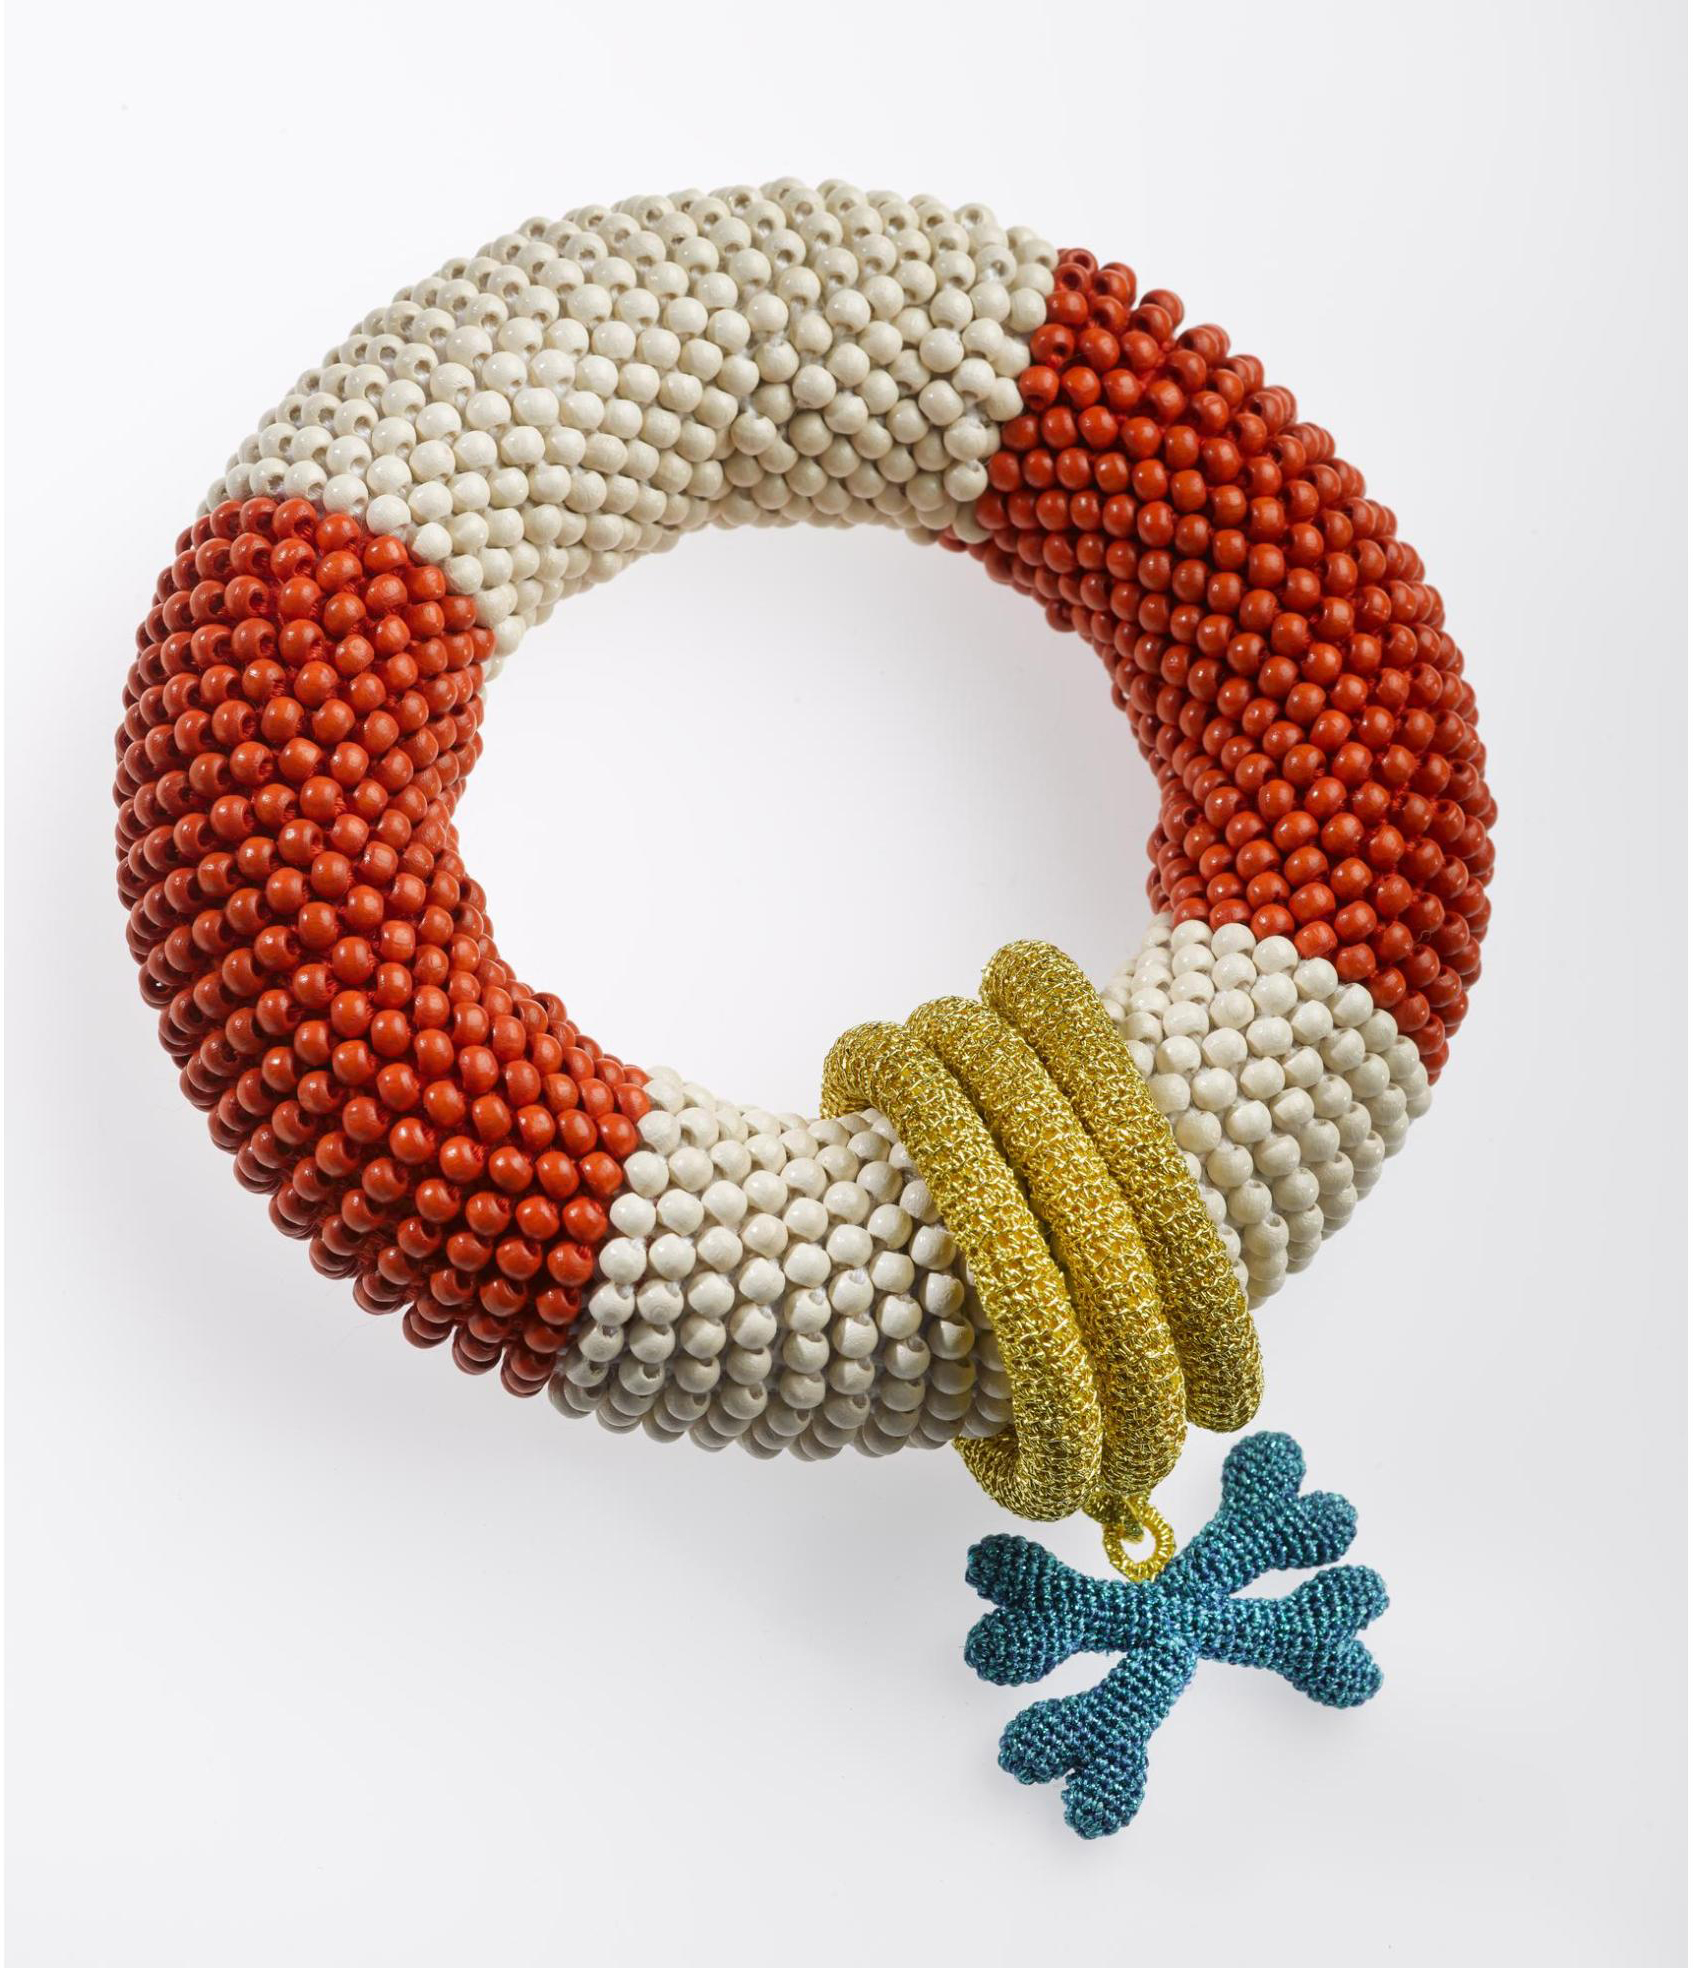 Lifebuoy Bracelet, crocheted textile, mixed media by Felieke van der Leest, 2000. Part of the Terry Brodie Smith collection.